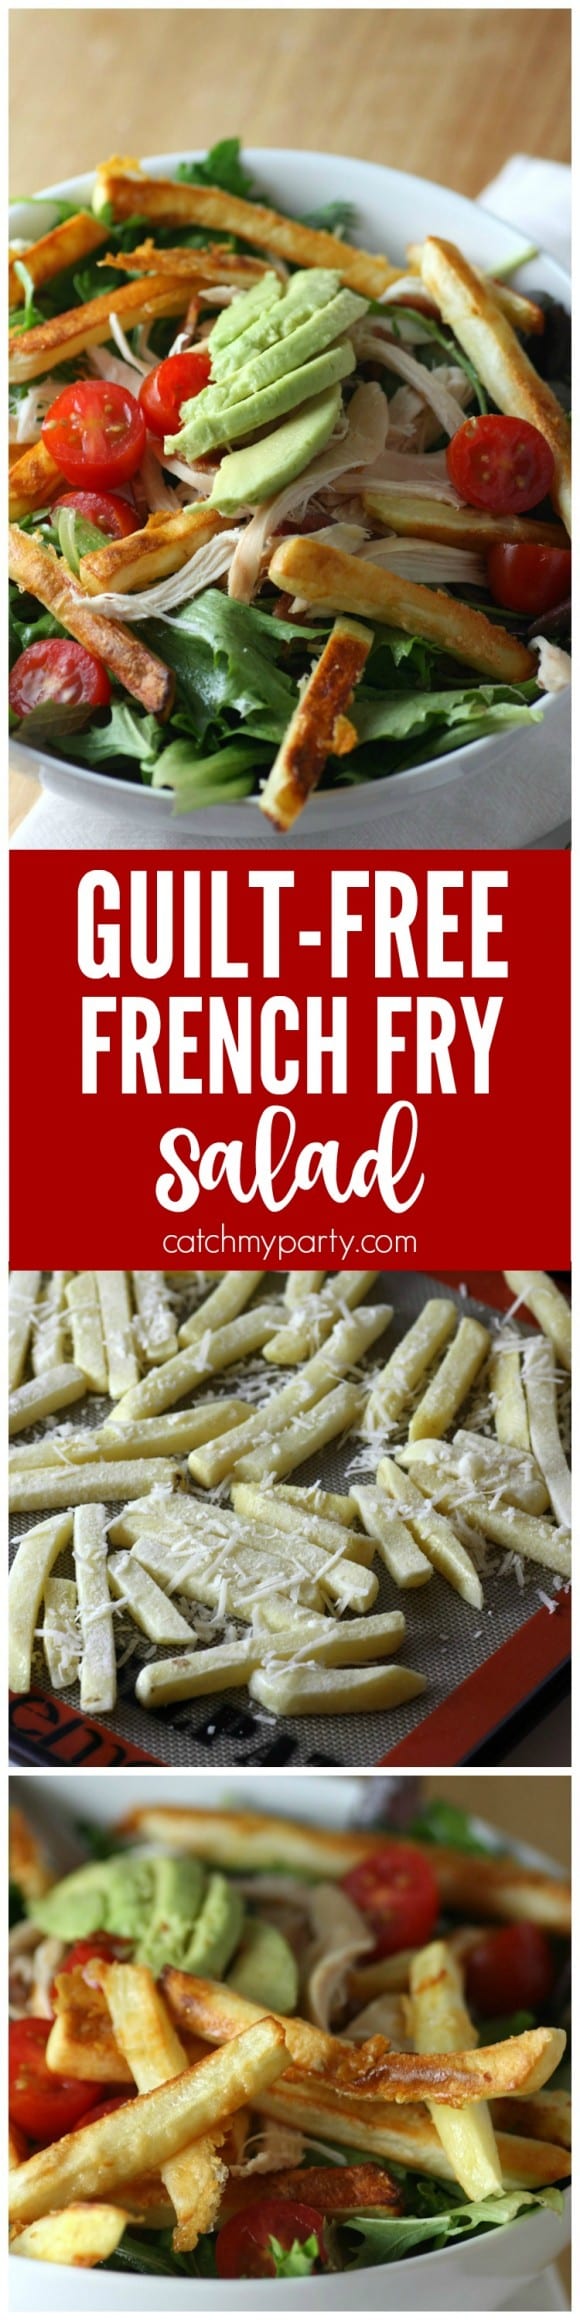 Here's how to make a guilt-free French fry salad that tastes delicious! | CatchMyParty.com